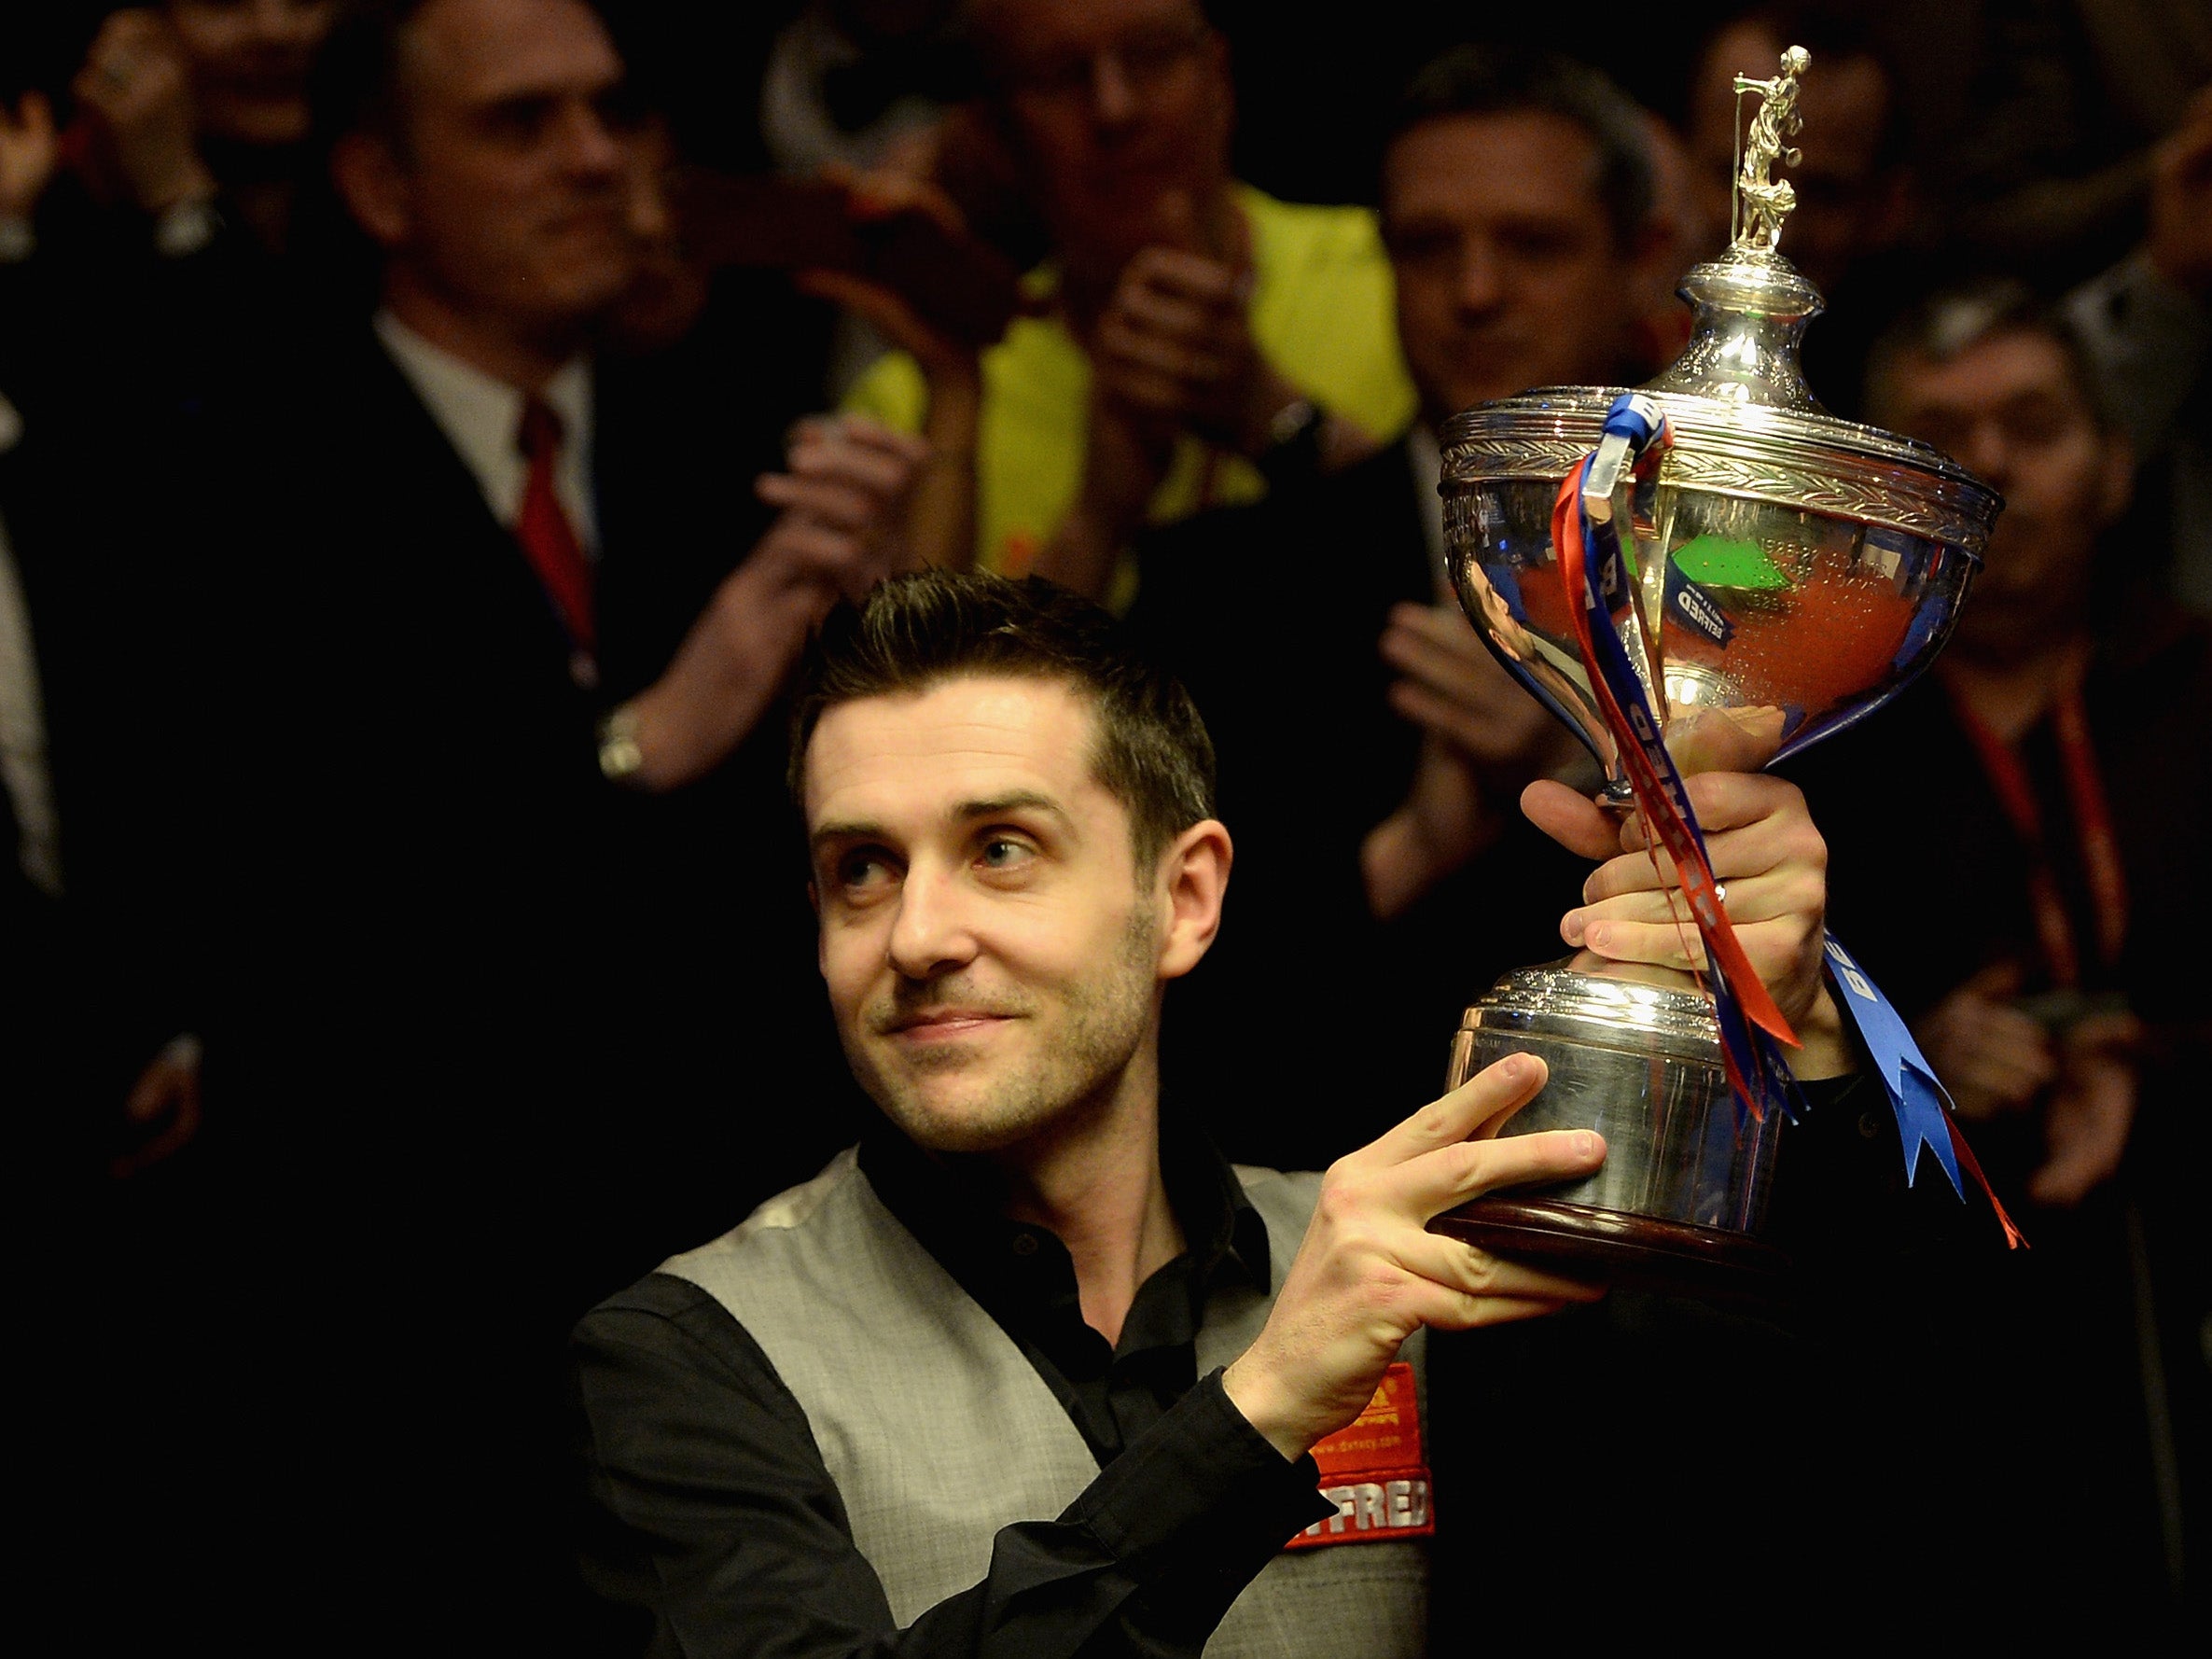 Selby won the tournament at the Crucible 12 months ago